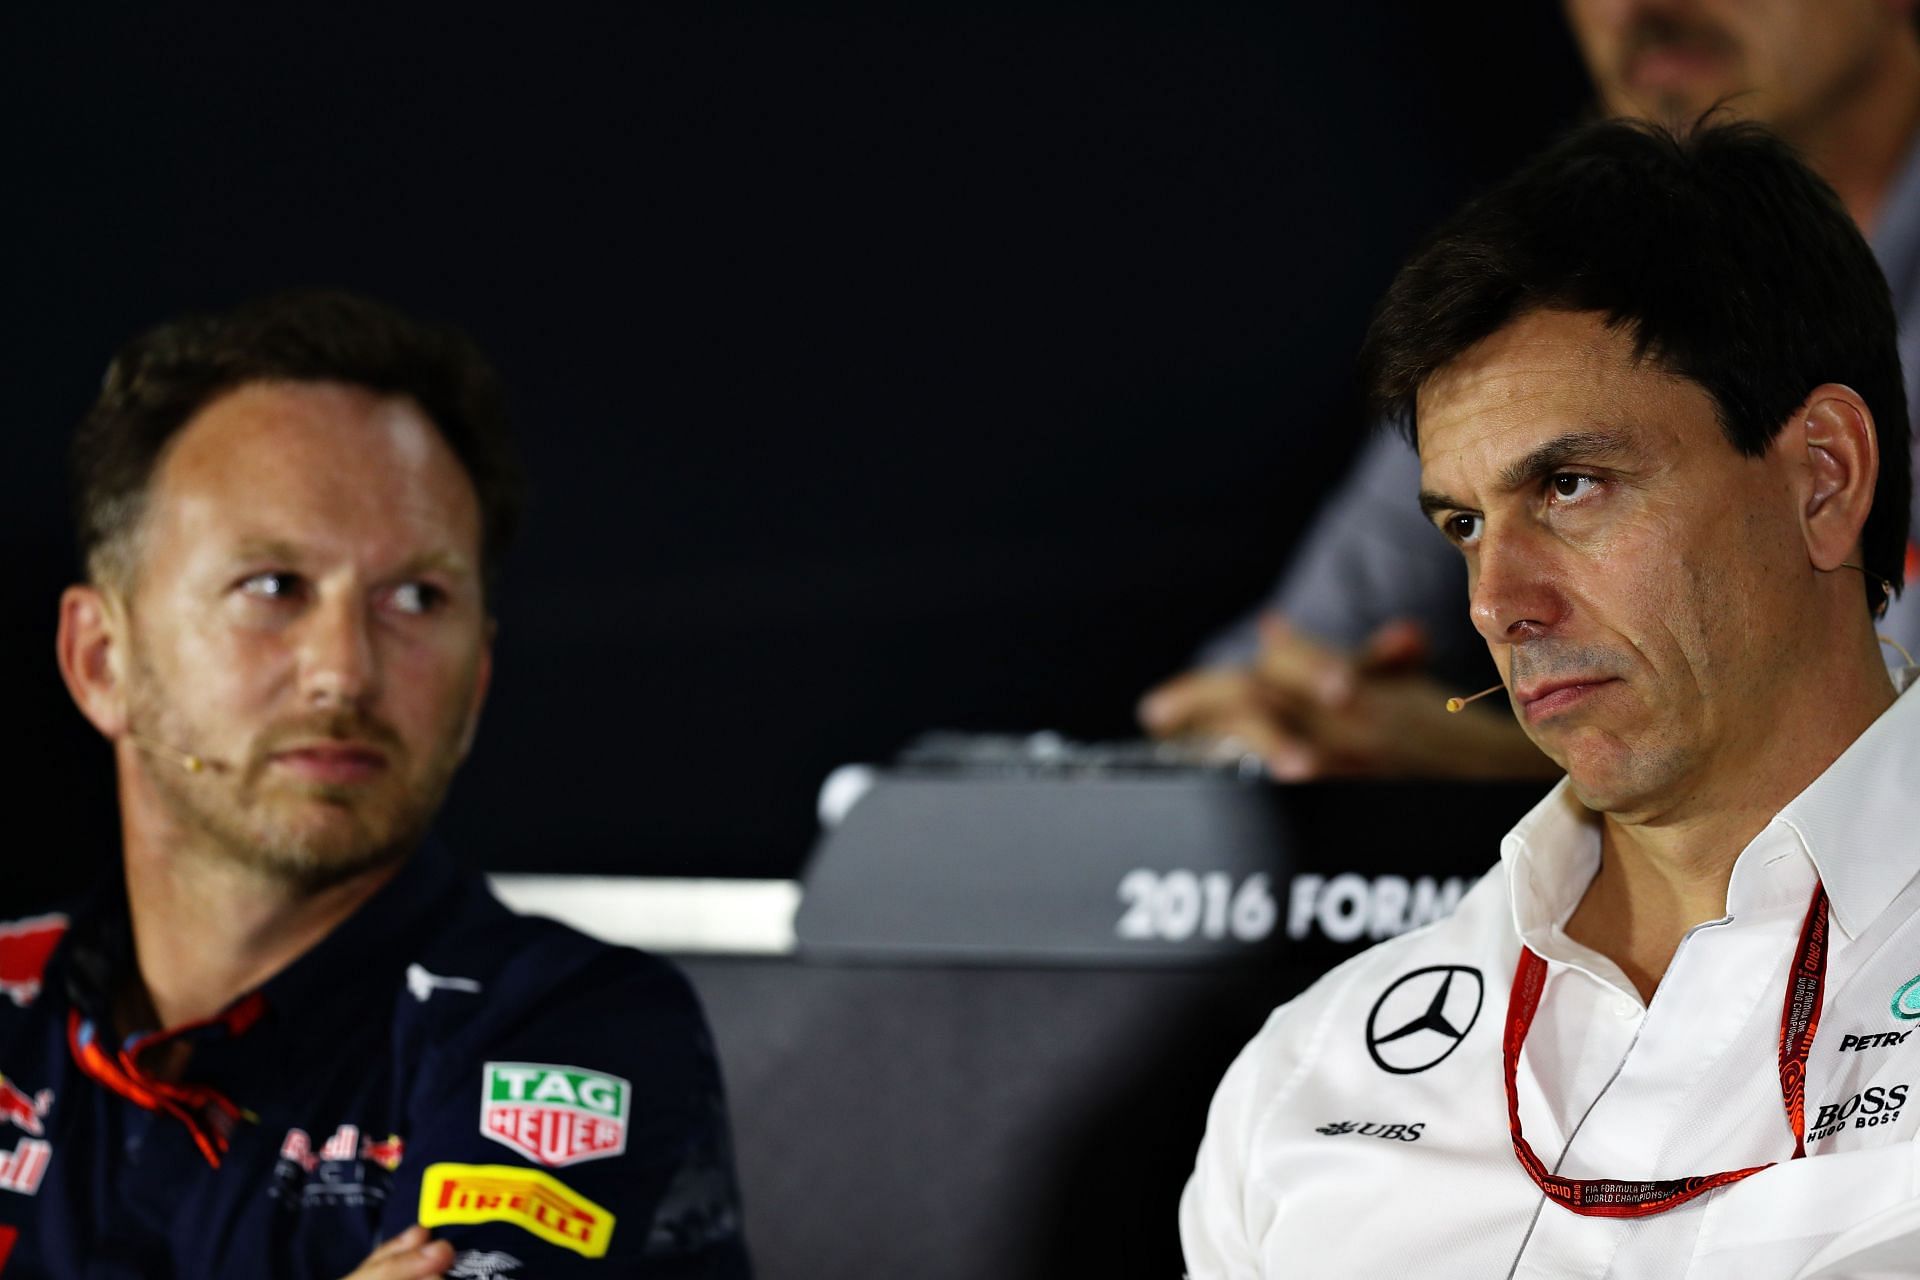 F1 News: Mercedes' Toto Wolff compares Red Bull's Christian Horner to ...